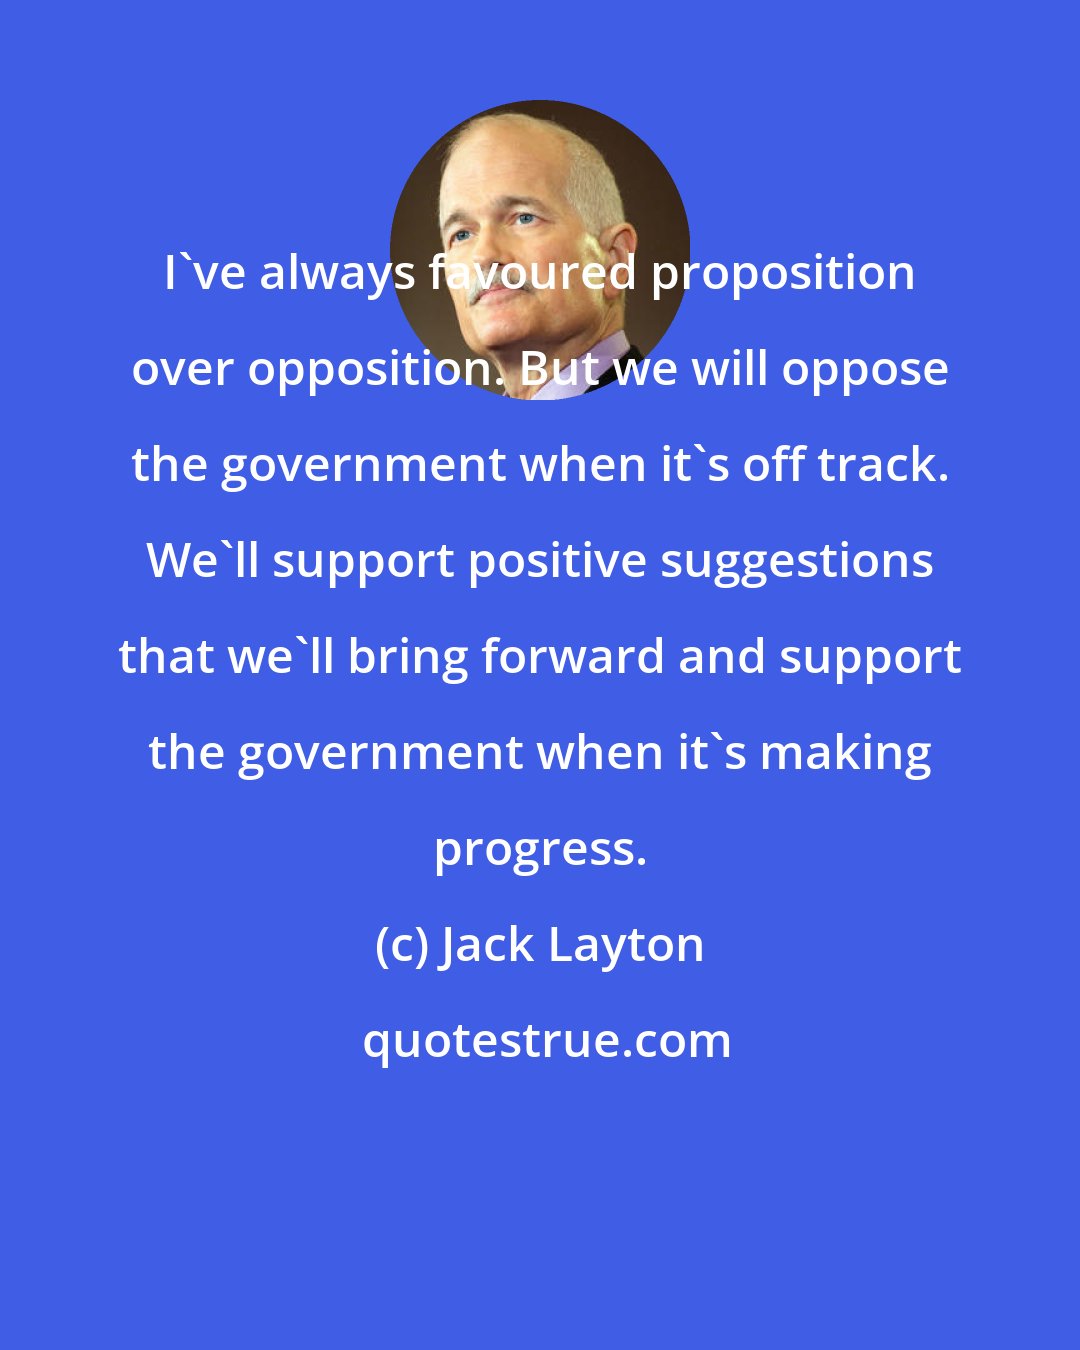 Jack Layton: I've always favoured proposition over opposition. But we will oppose the government when it's off track. We'll support positive suggestions that we'll bring forward and support the government when it's making progress.